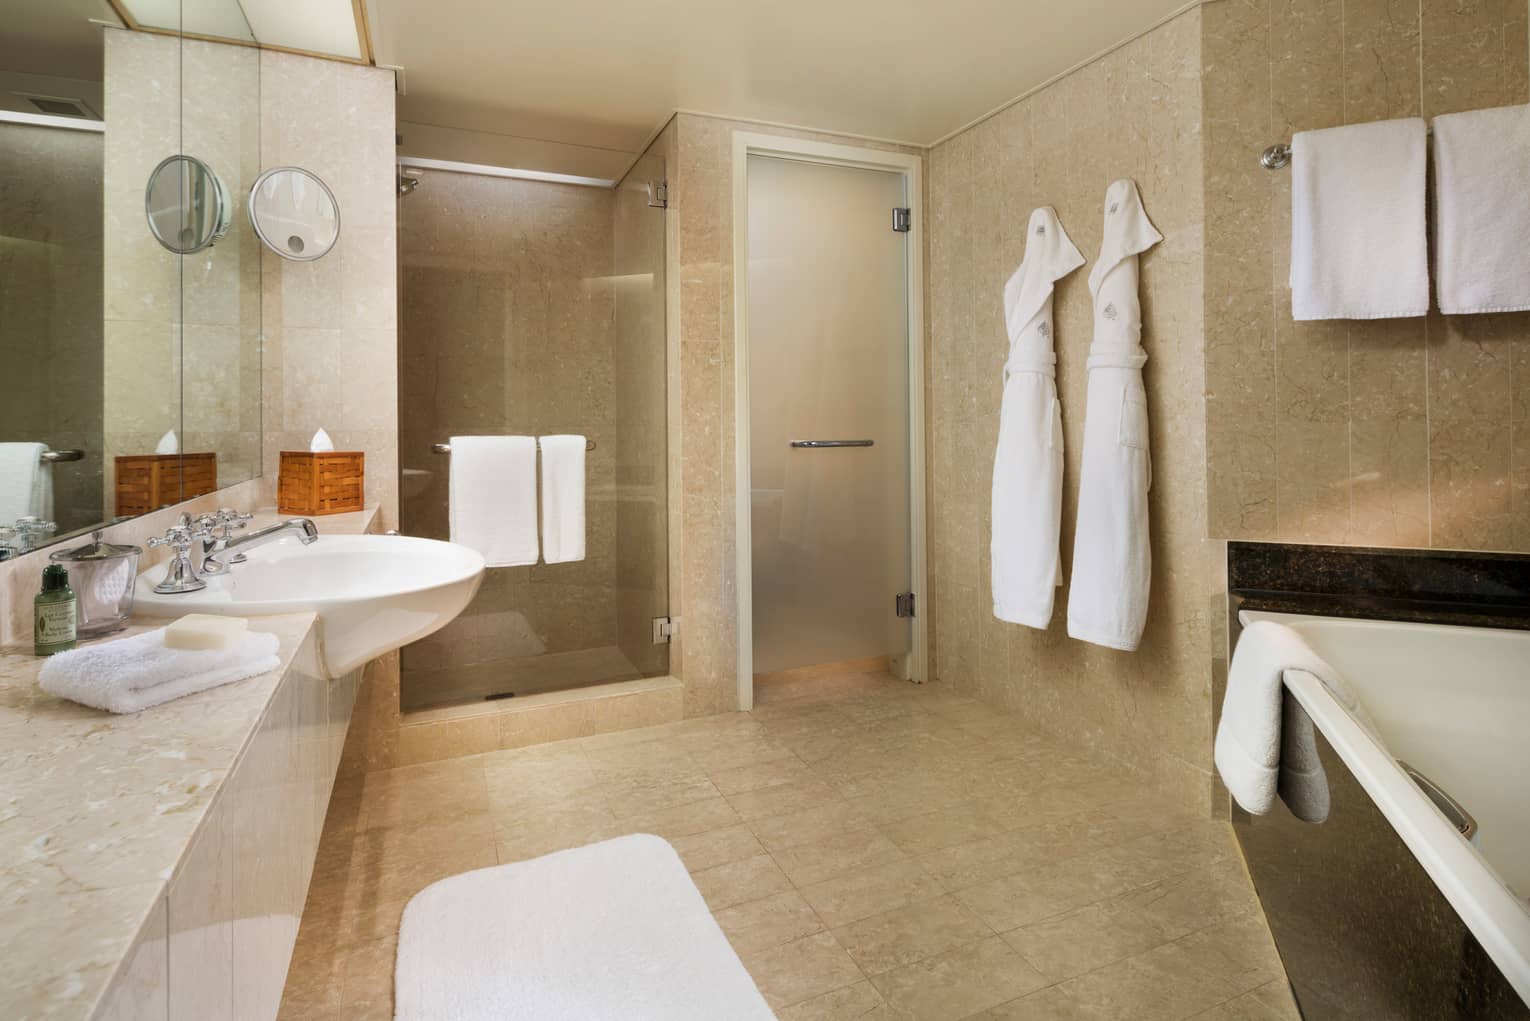 Hotel Suite full marble bathroom, two white robes hang by glass walk-in showers, sink